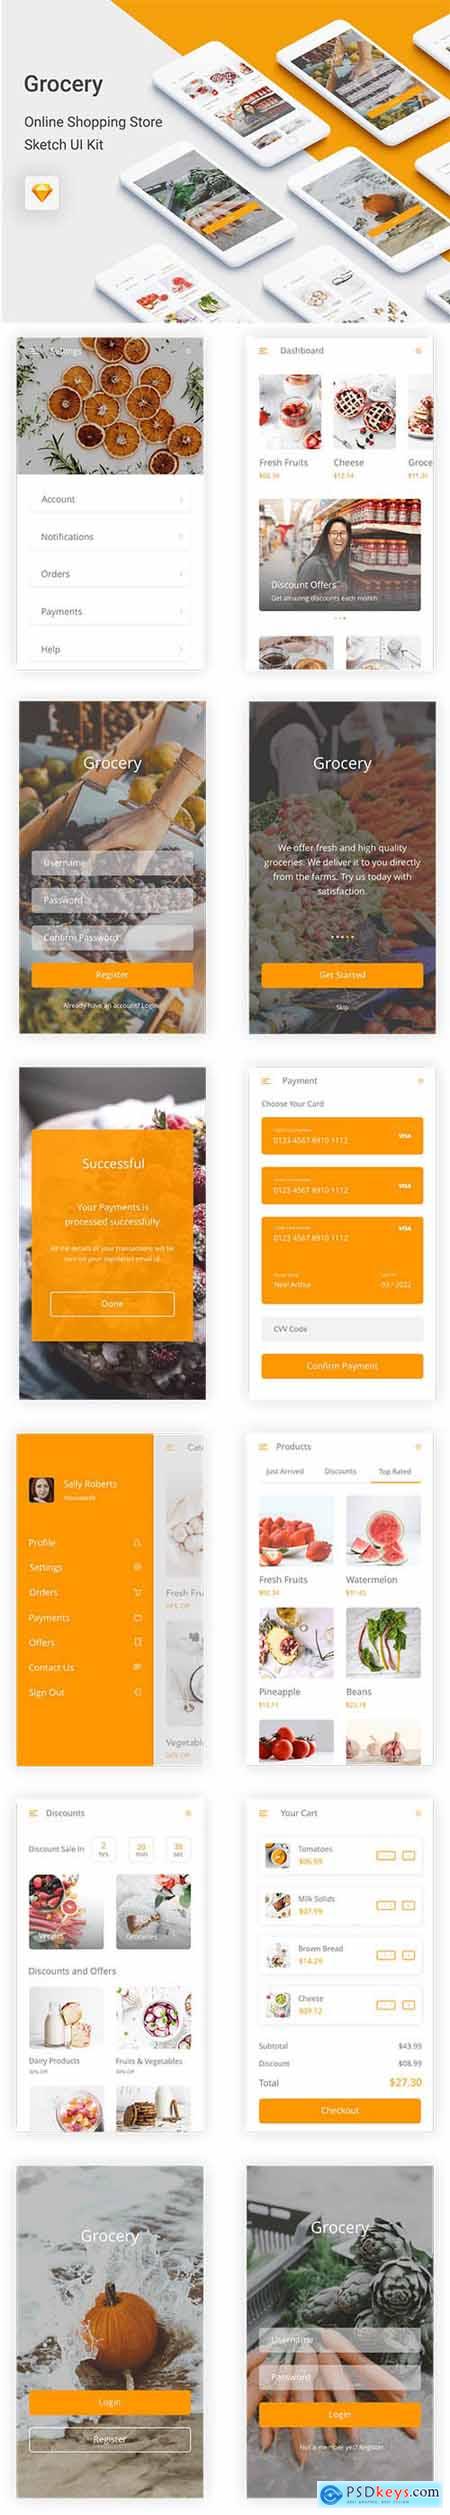 Grocery - Online Shopping Store UI Kit for Sketch